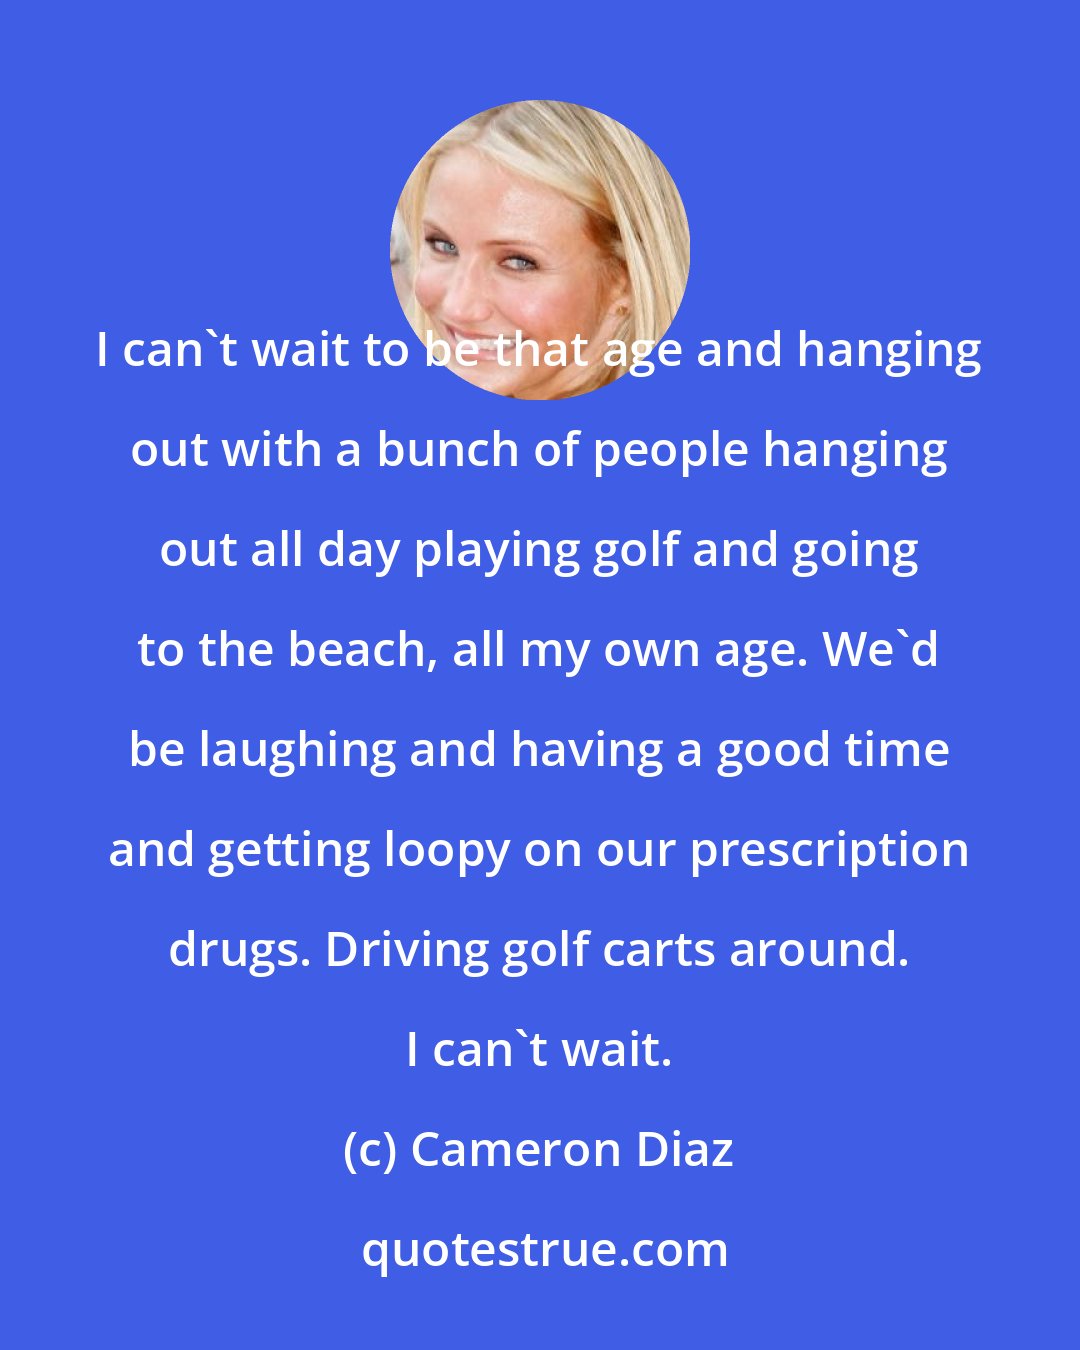 Cameron Diaz: I can't wait to be that age and hanging out with a bunch of people hanging out all day playing golf and going to the beach, all my own age. We'd be laughing and having a good time and getting loopy on our prescription drugs. Driving golf carts around. I can't wait.